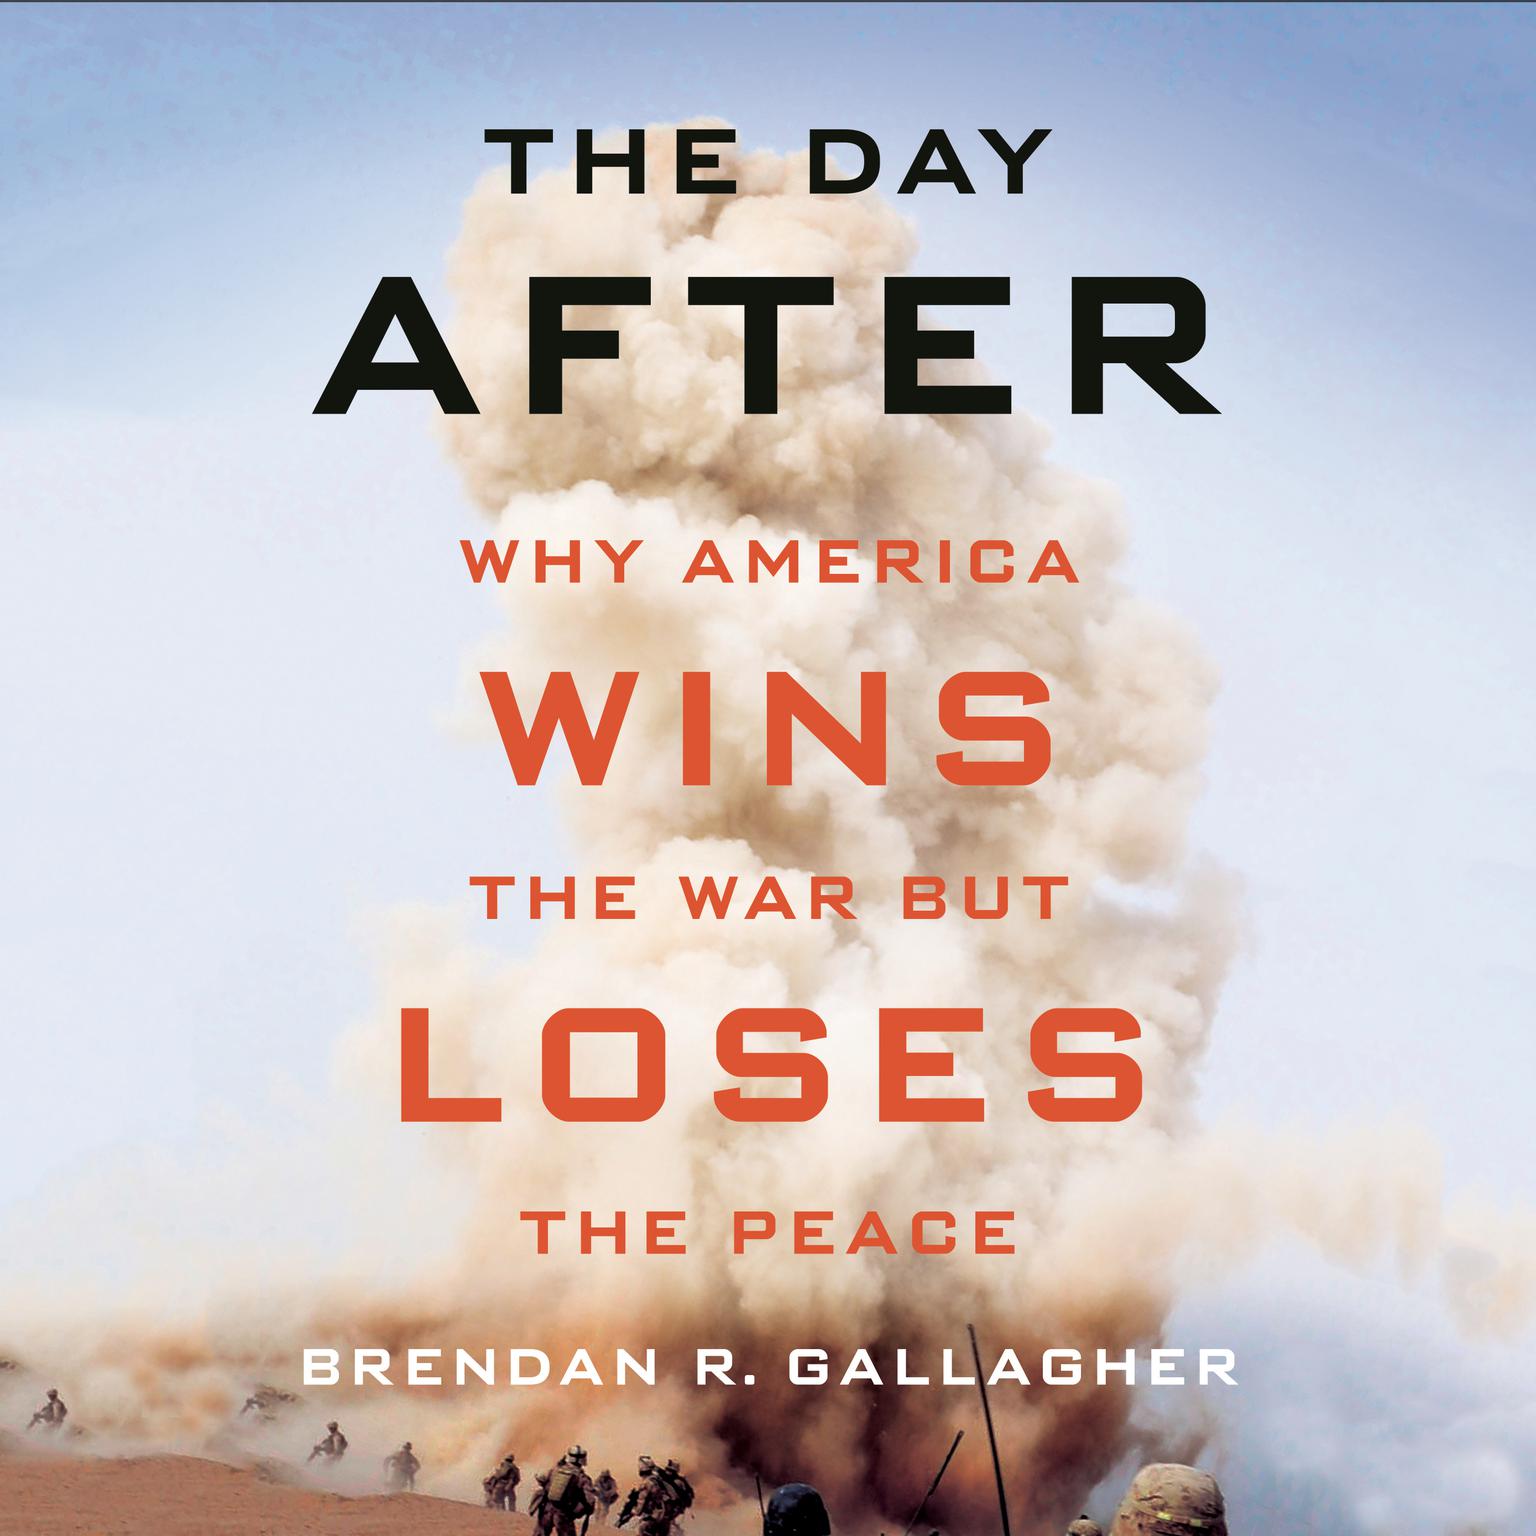 The Day After: Why America Wins the War but Loses the Peace Audiobook, by Brendan R. Gallagher